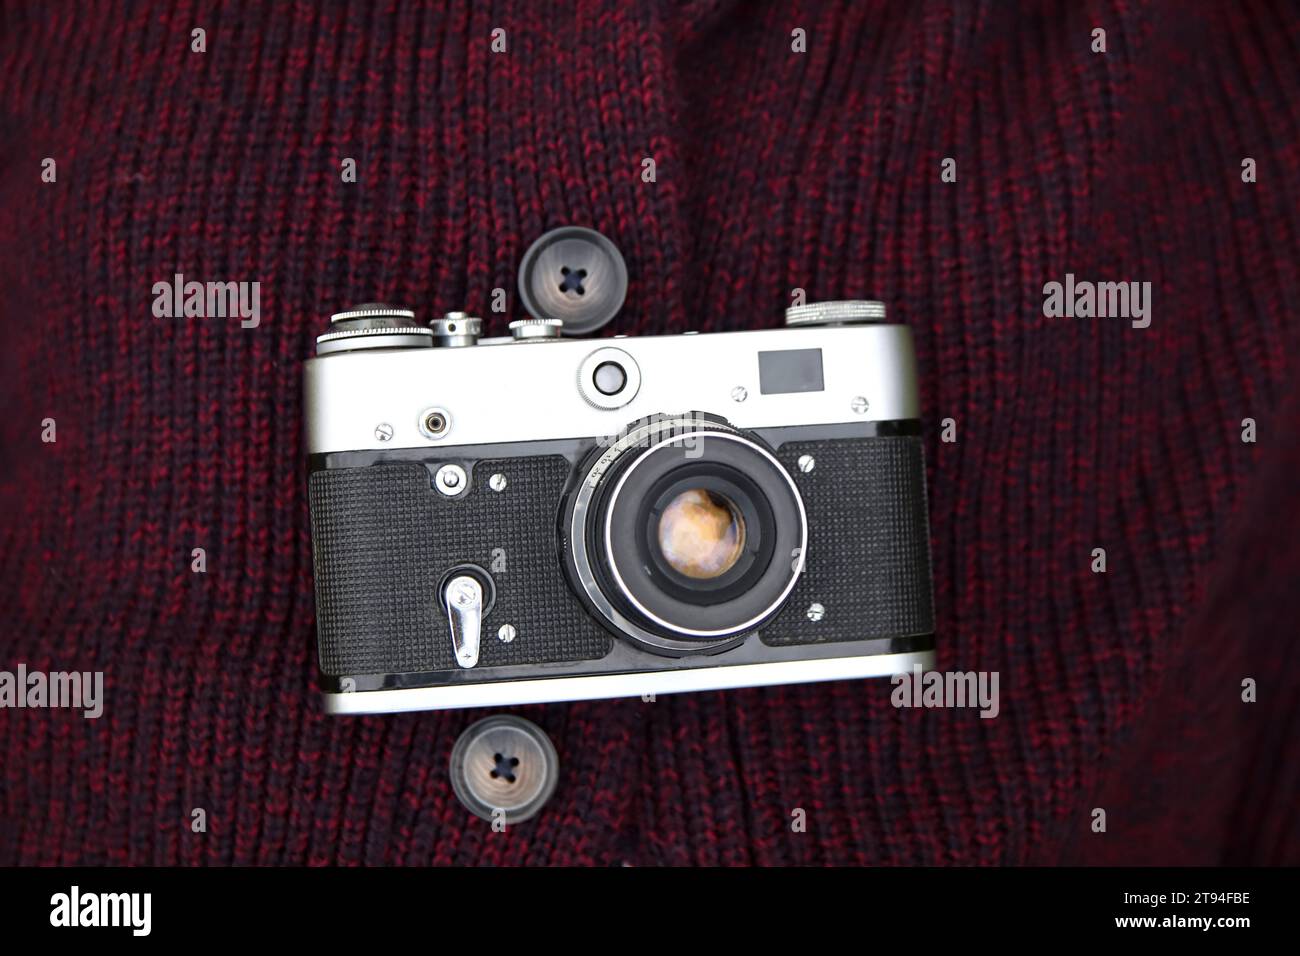 Retro film photo camera on red knitted sweater background. Old retro camera on vintage abstract background. Close up Stock Photo